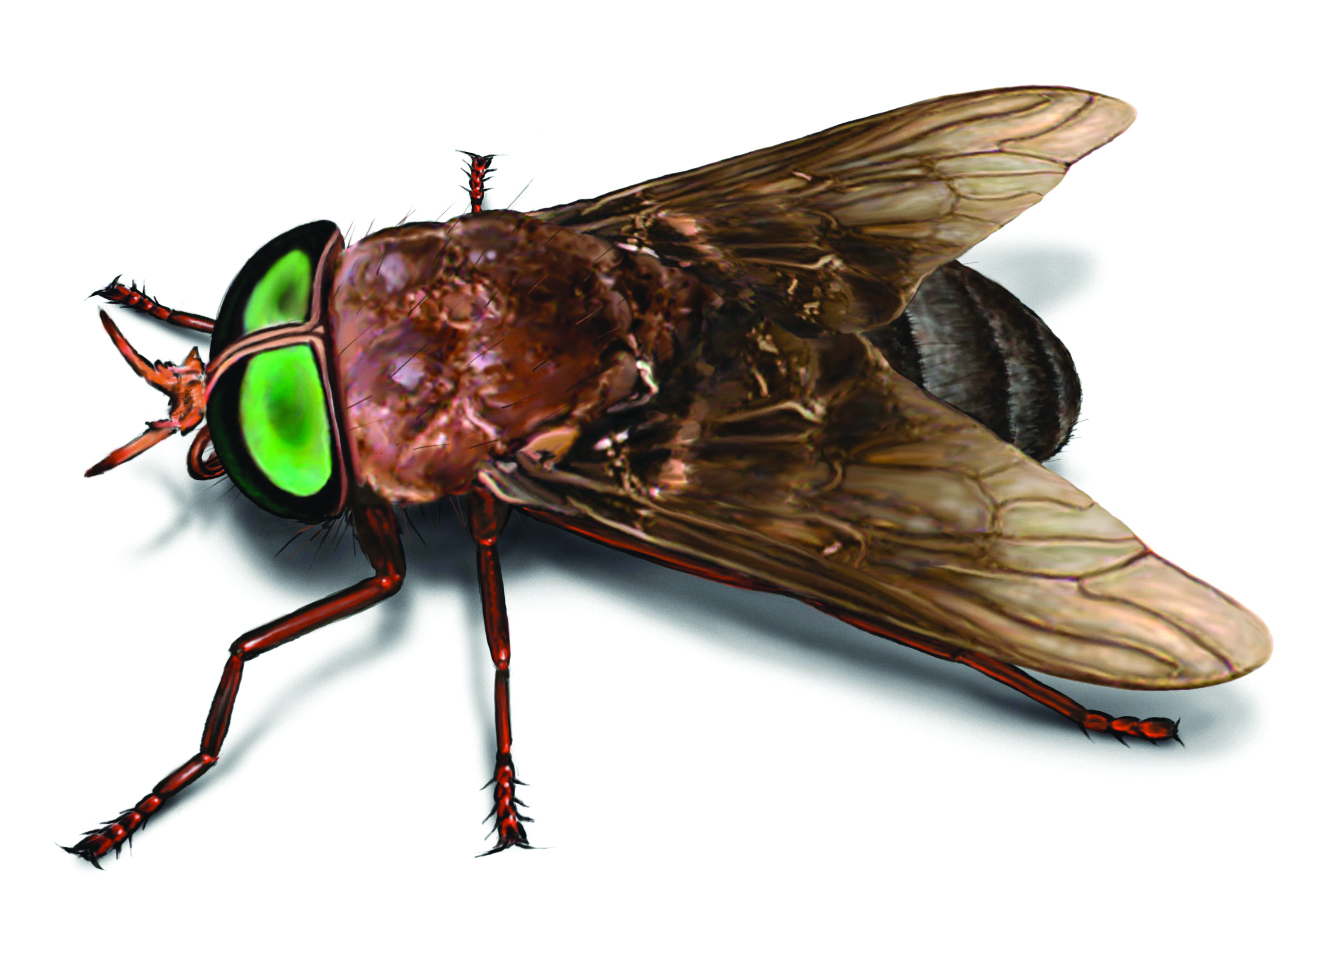 How to get rid of horse flies in your house